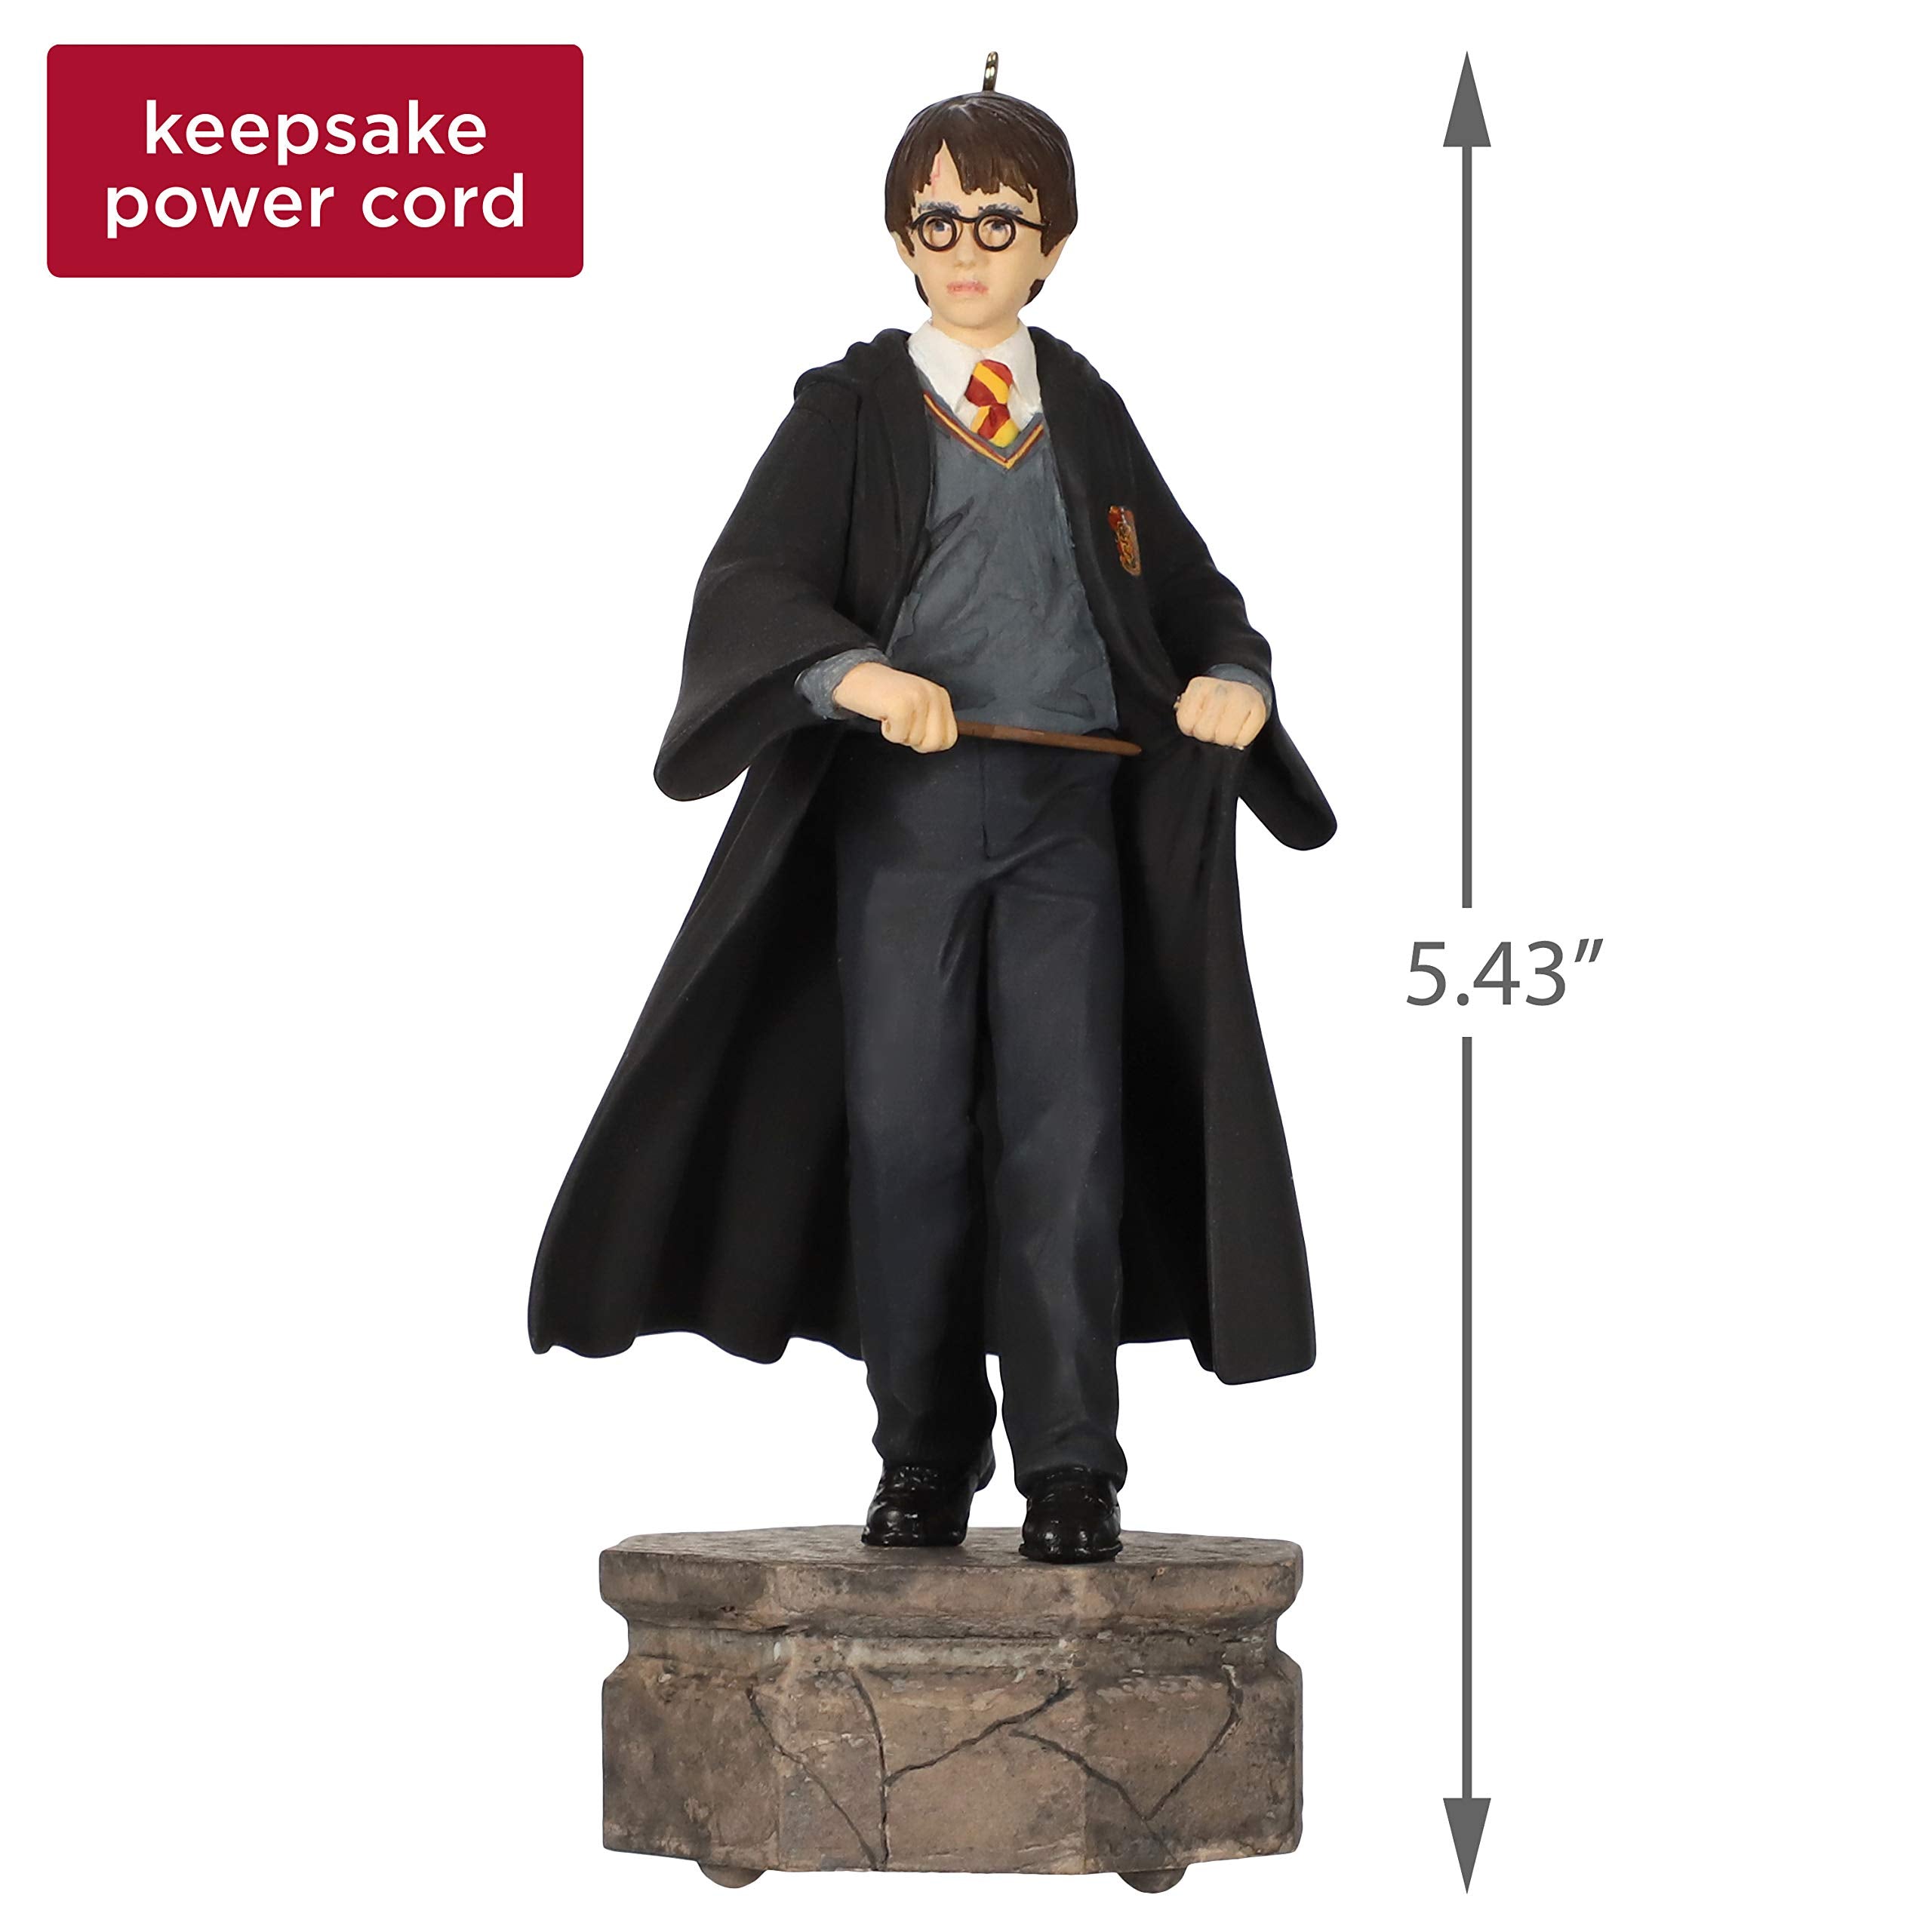 Hallmark Keepsake Christmas Ornament 2019 Year Dated, Harry Potter Collection Harry Potter with Light and Sound